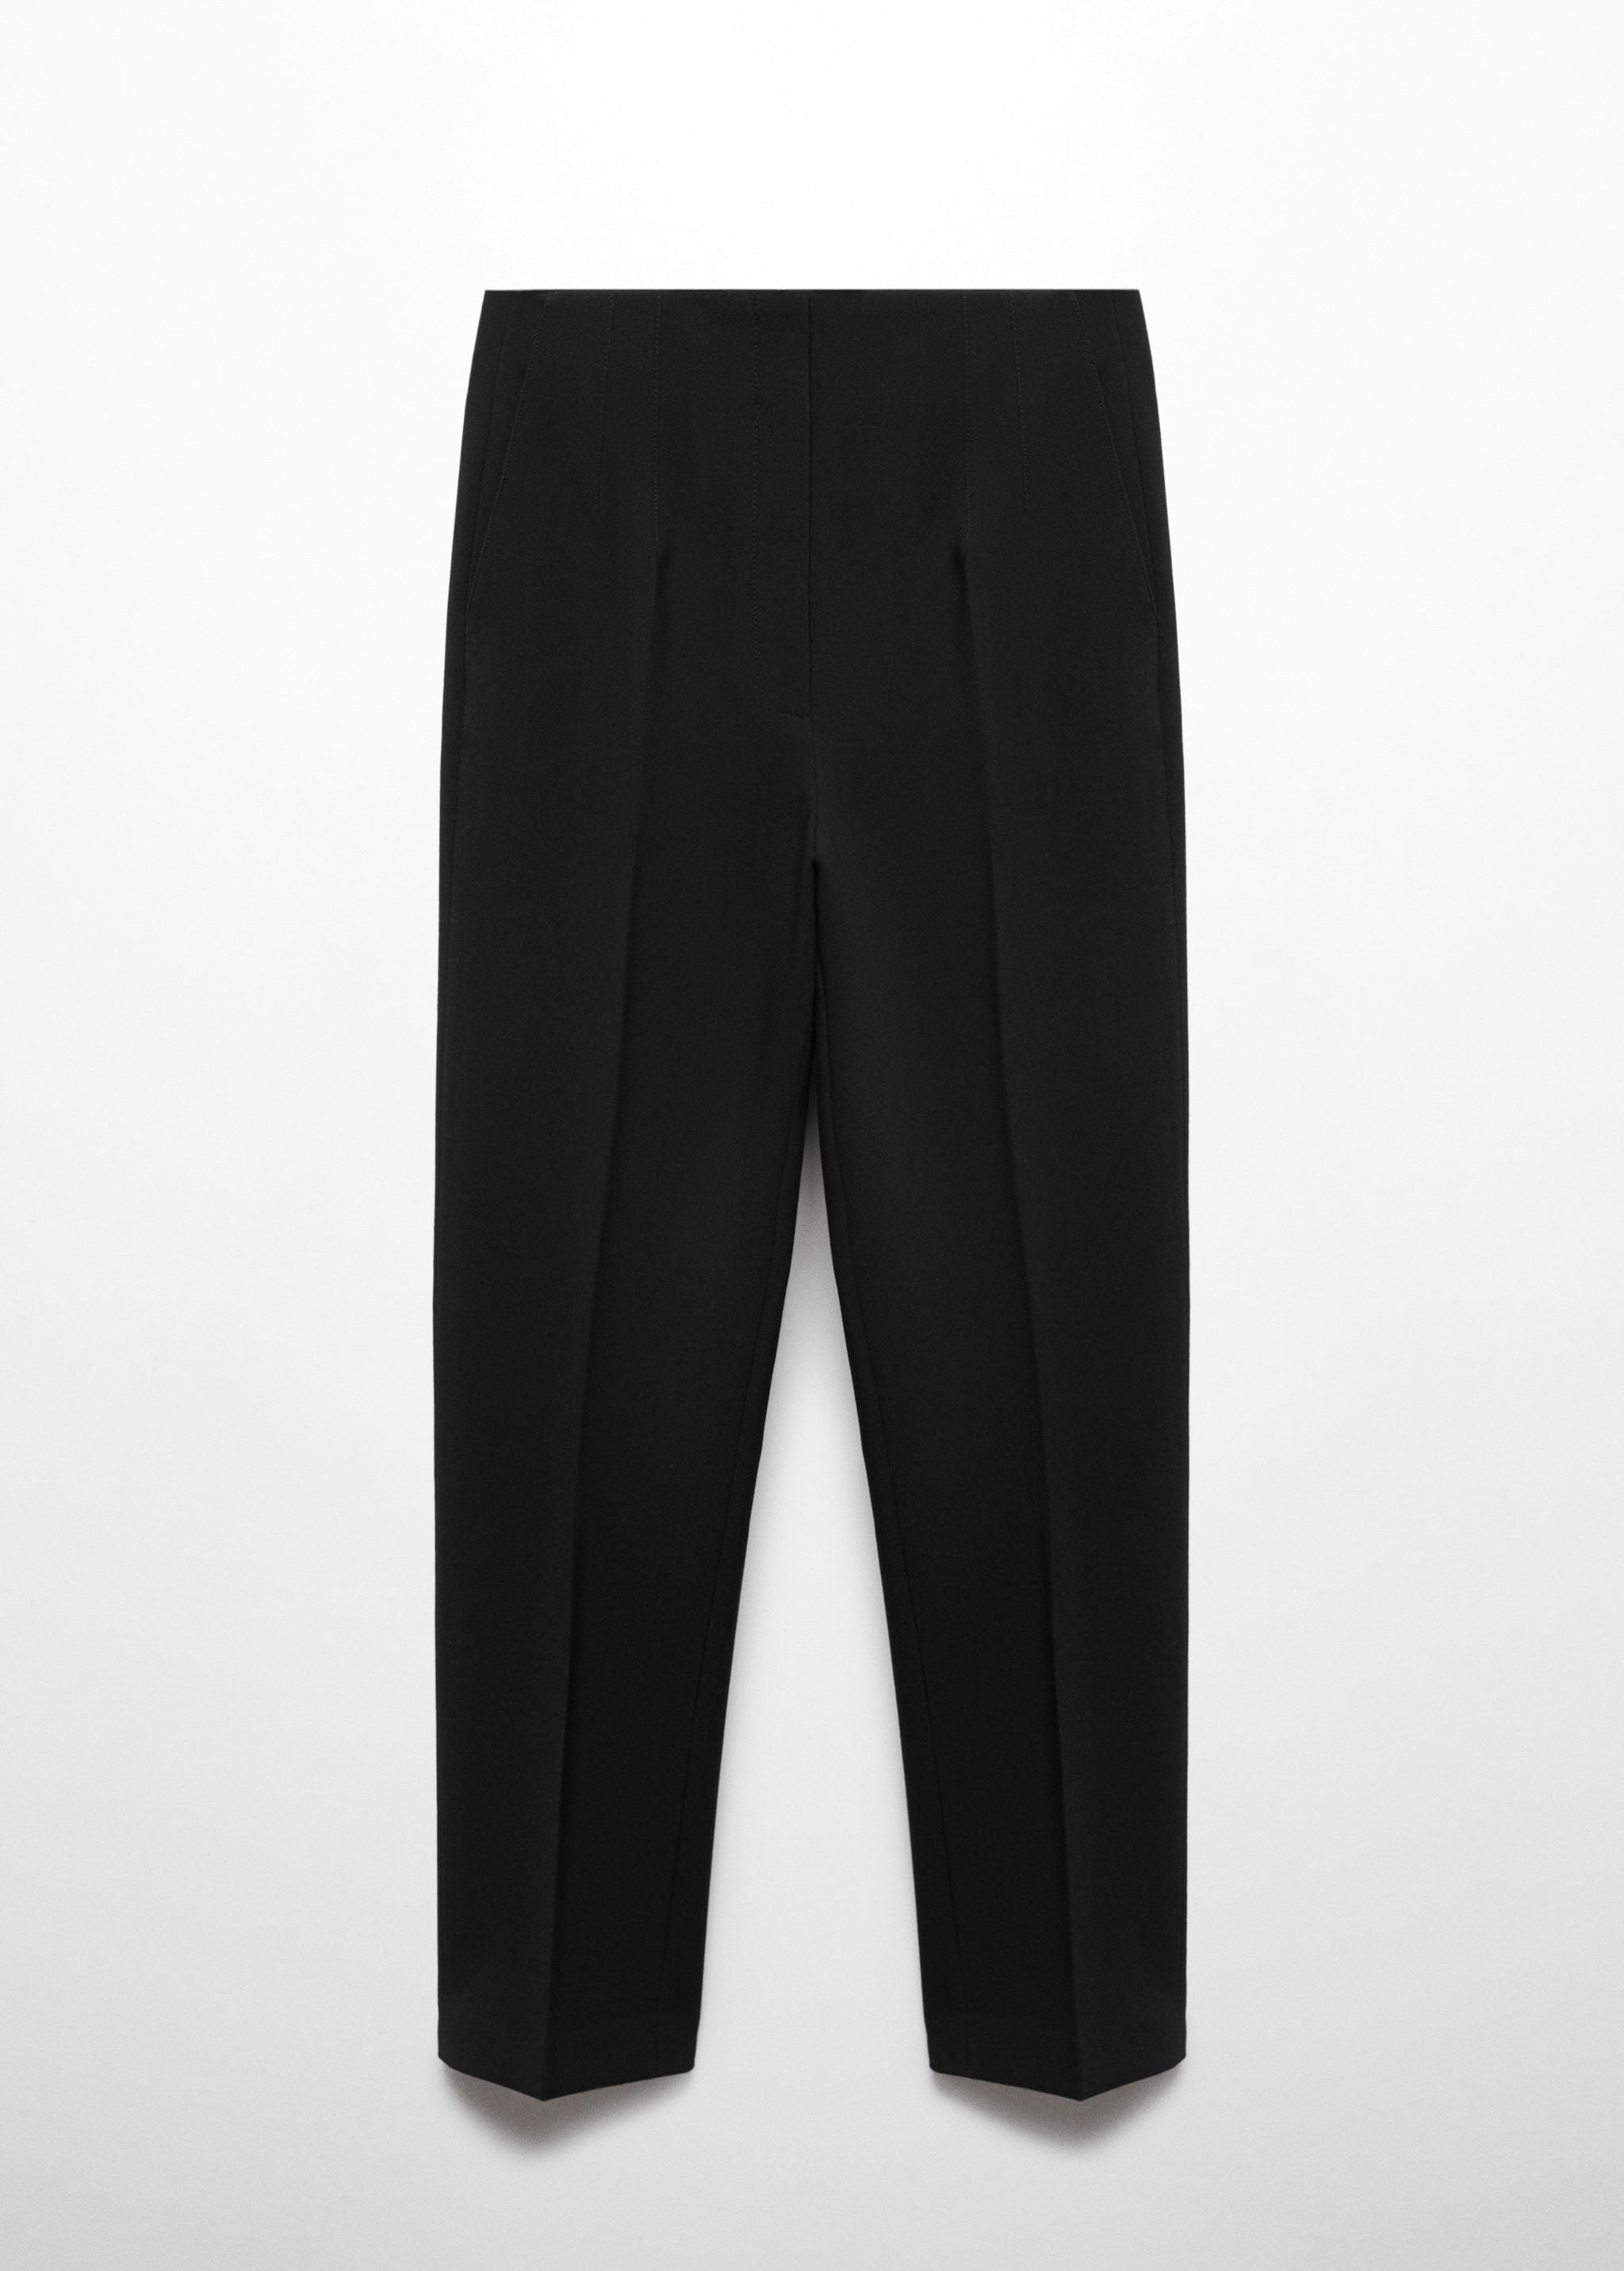 Pleat detail trousers - Article without model